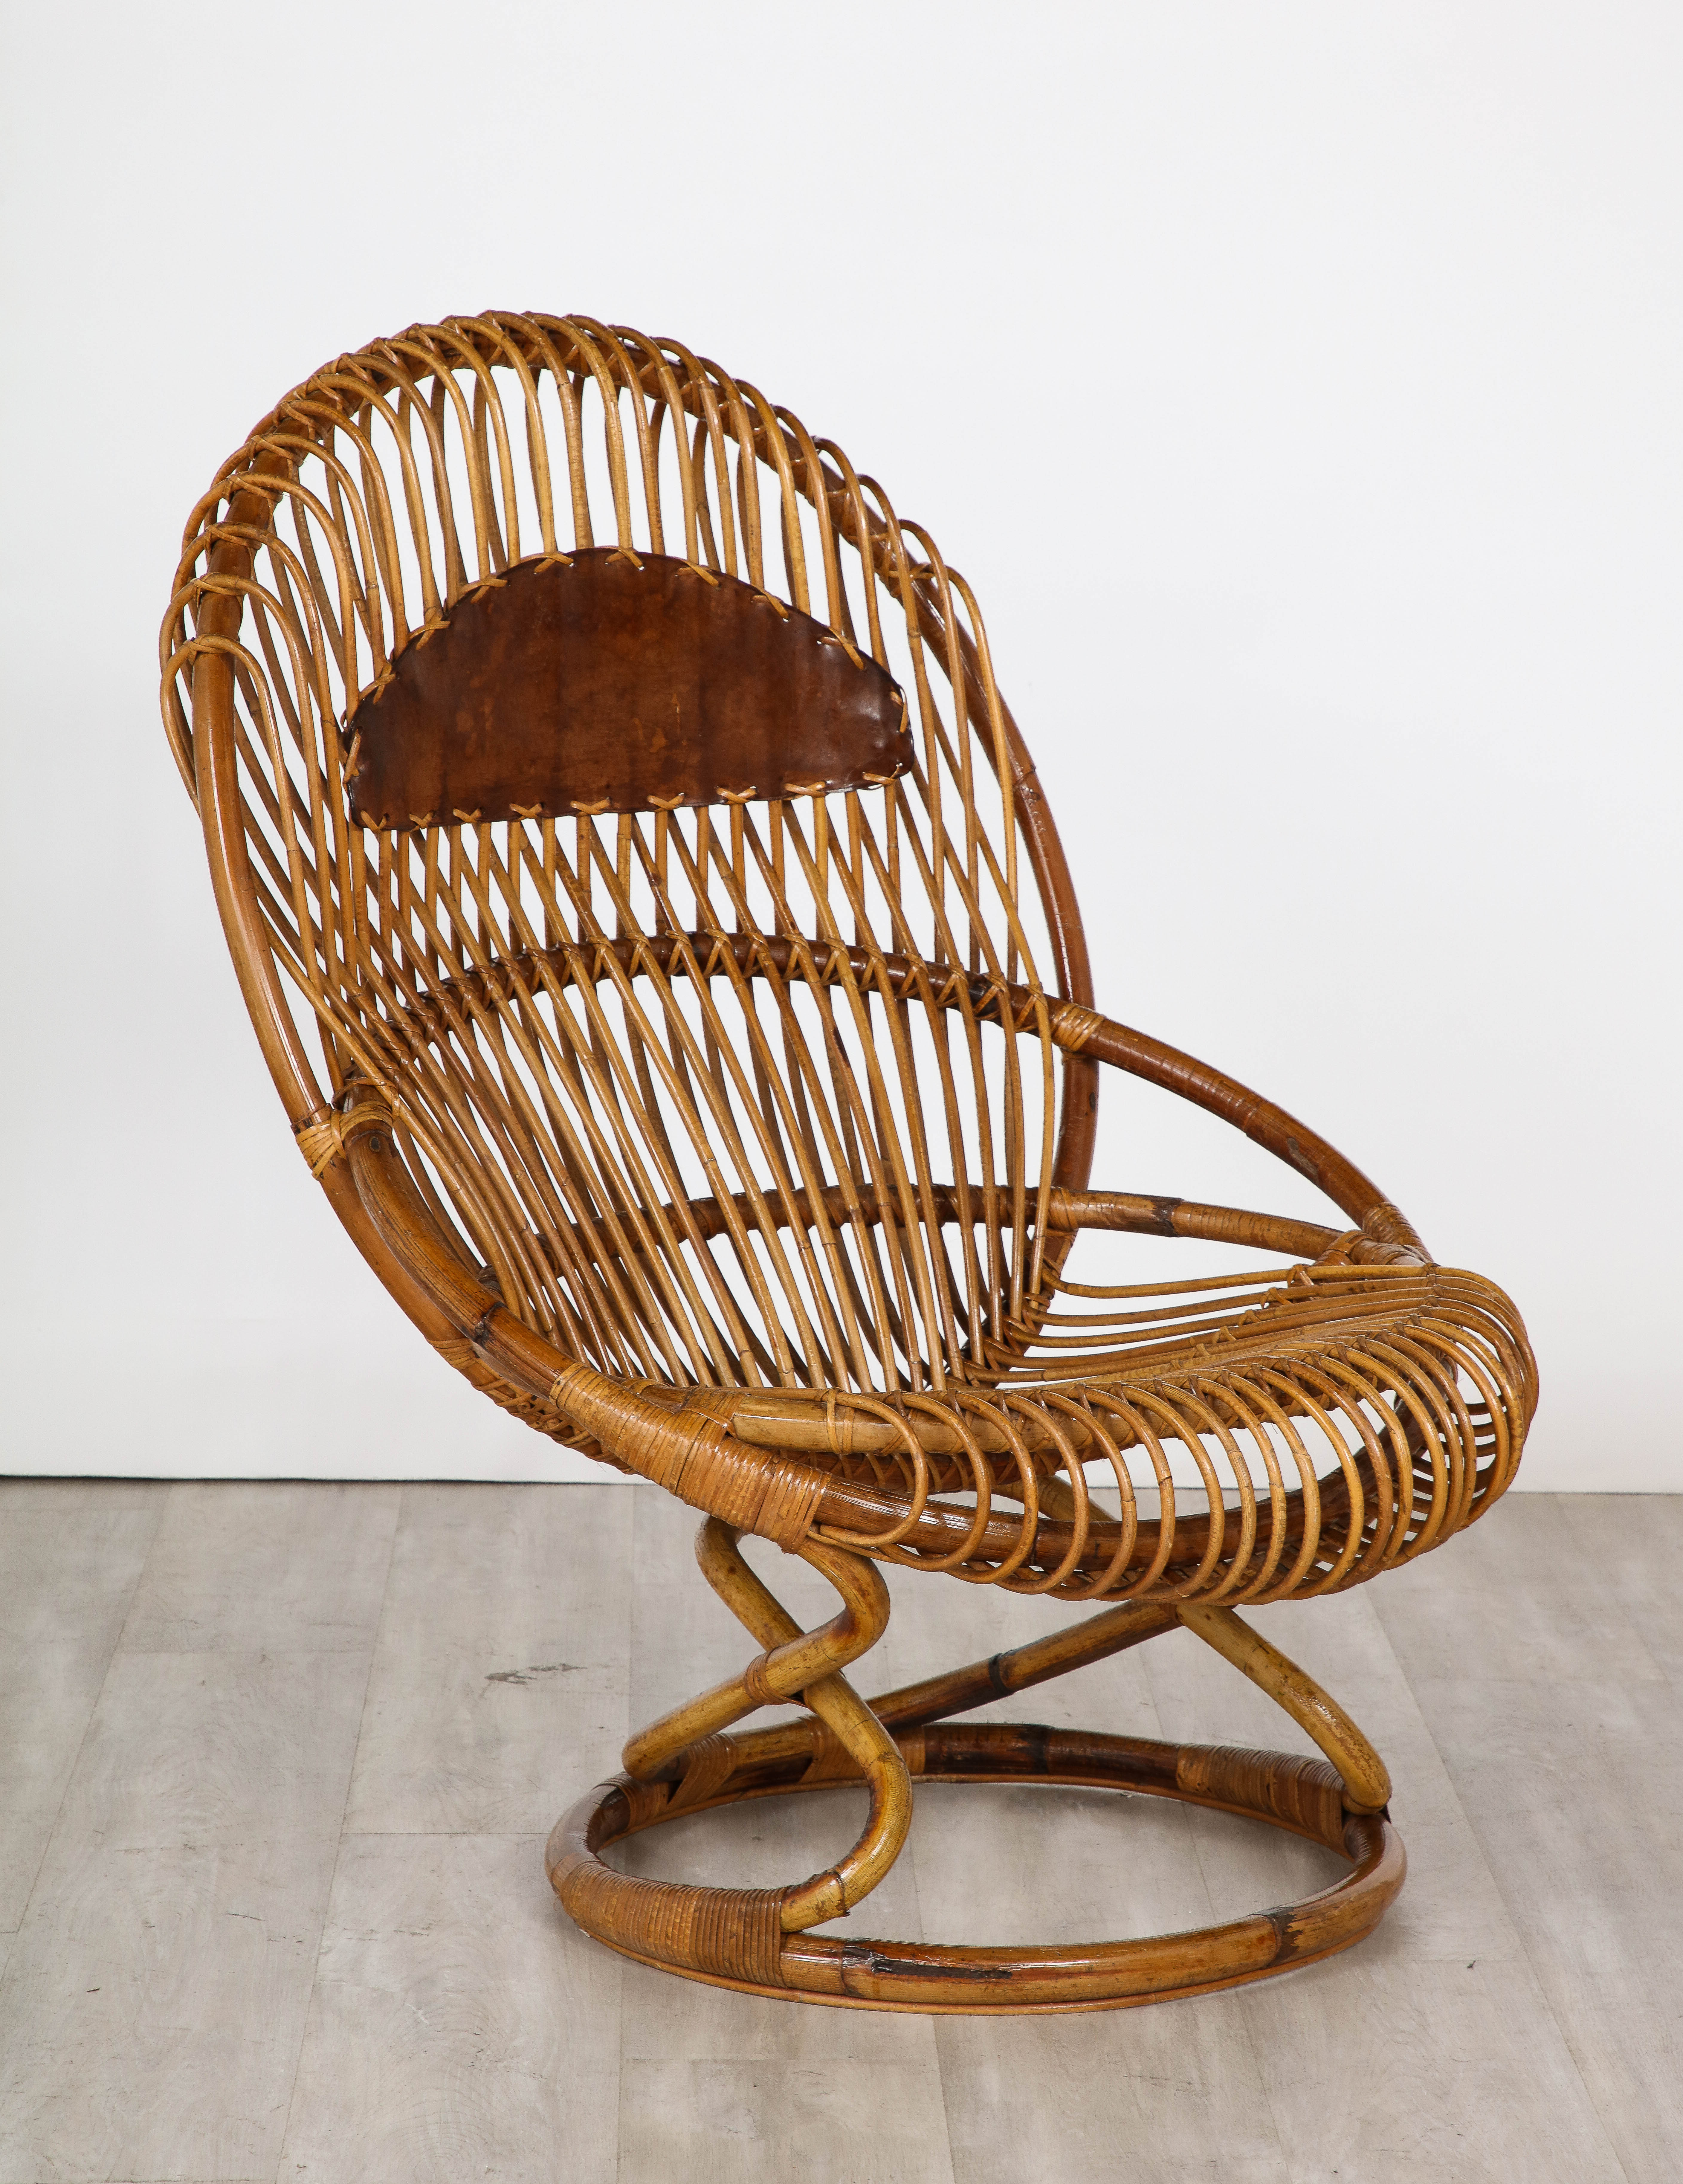 An oversized rattan and leather lounge chair designed by Tito Agnoli for Bonacina in the 1950's.  A highly sculptural design, highlighting the beauty of the natural wood, the color is warm and beautiful, the caramel brown leather on the backrest